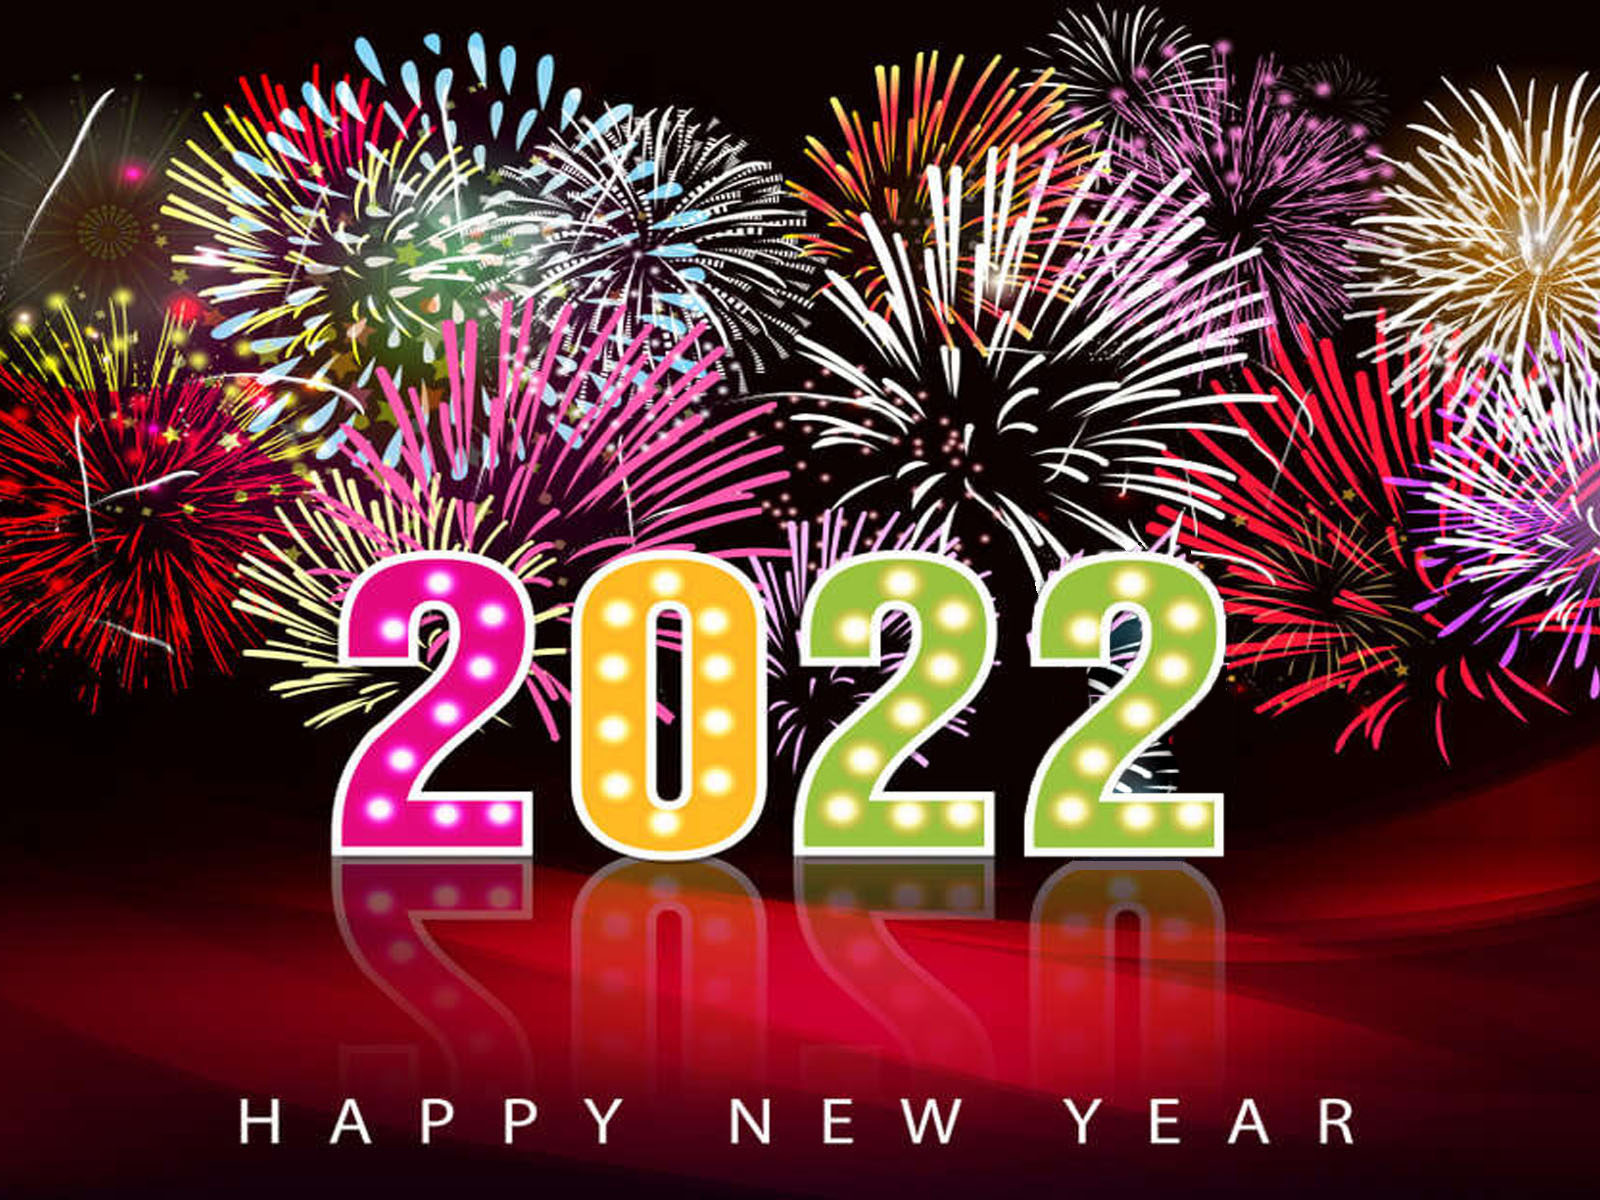 New Years Eve Background Image And Wallpaper Yl Puting